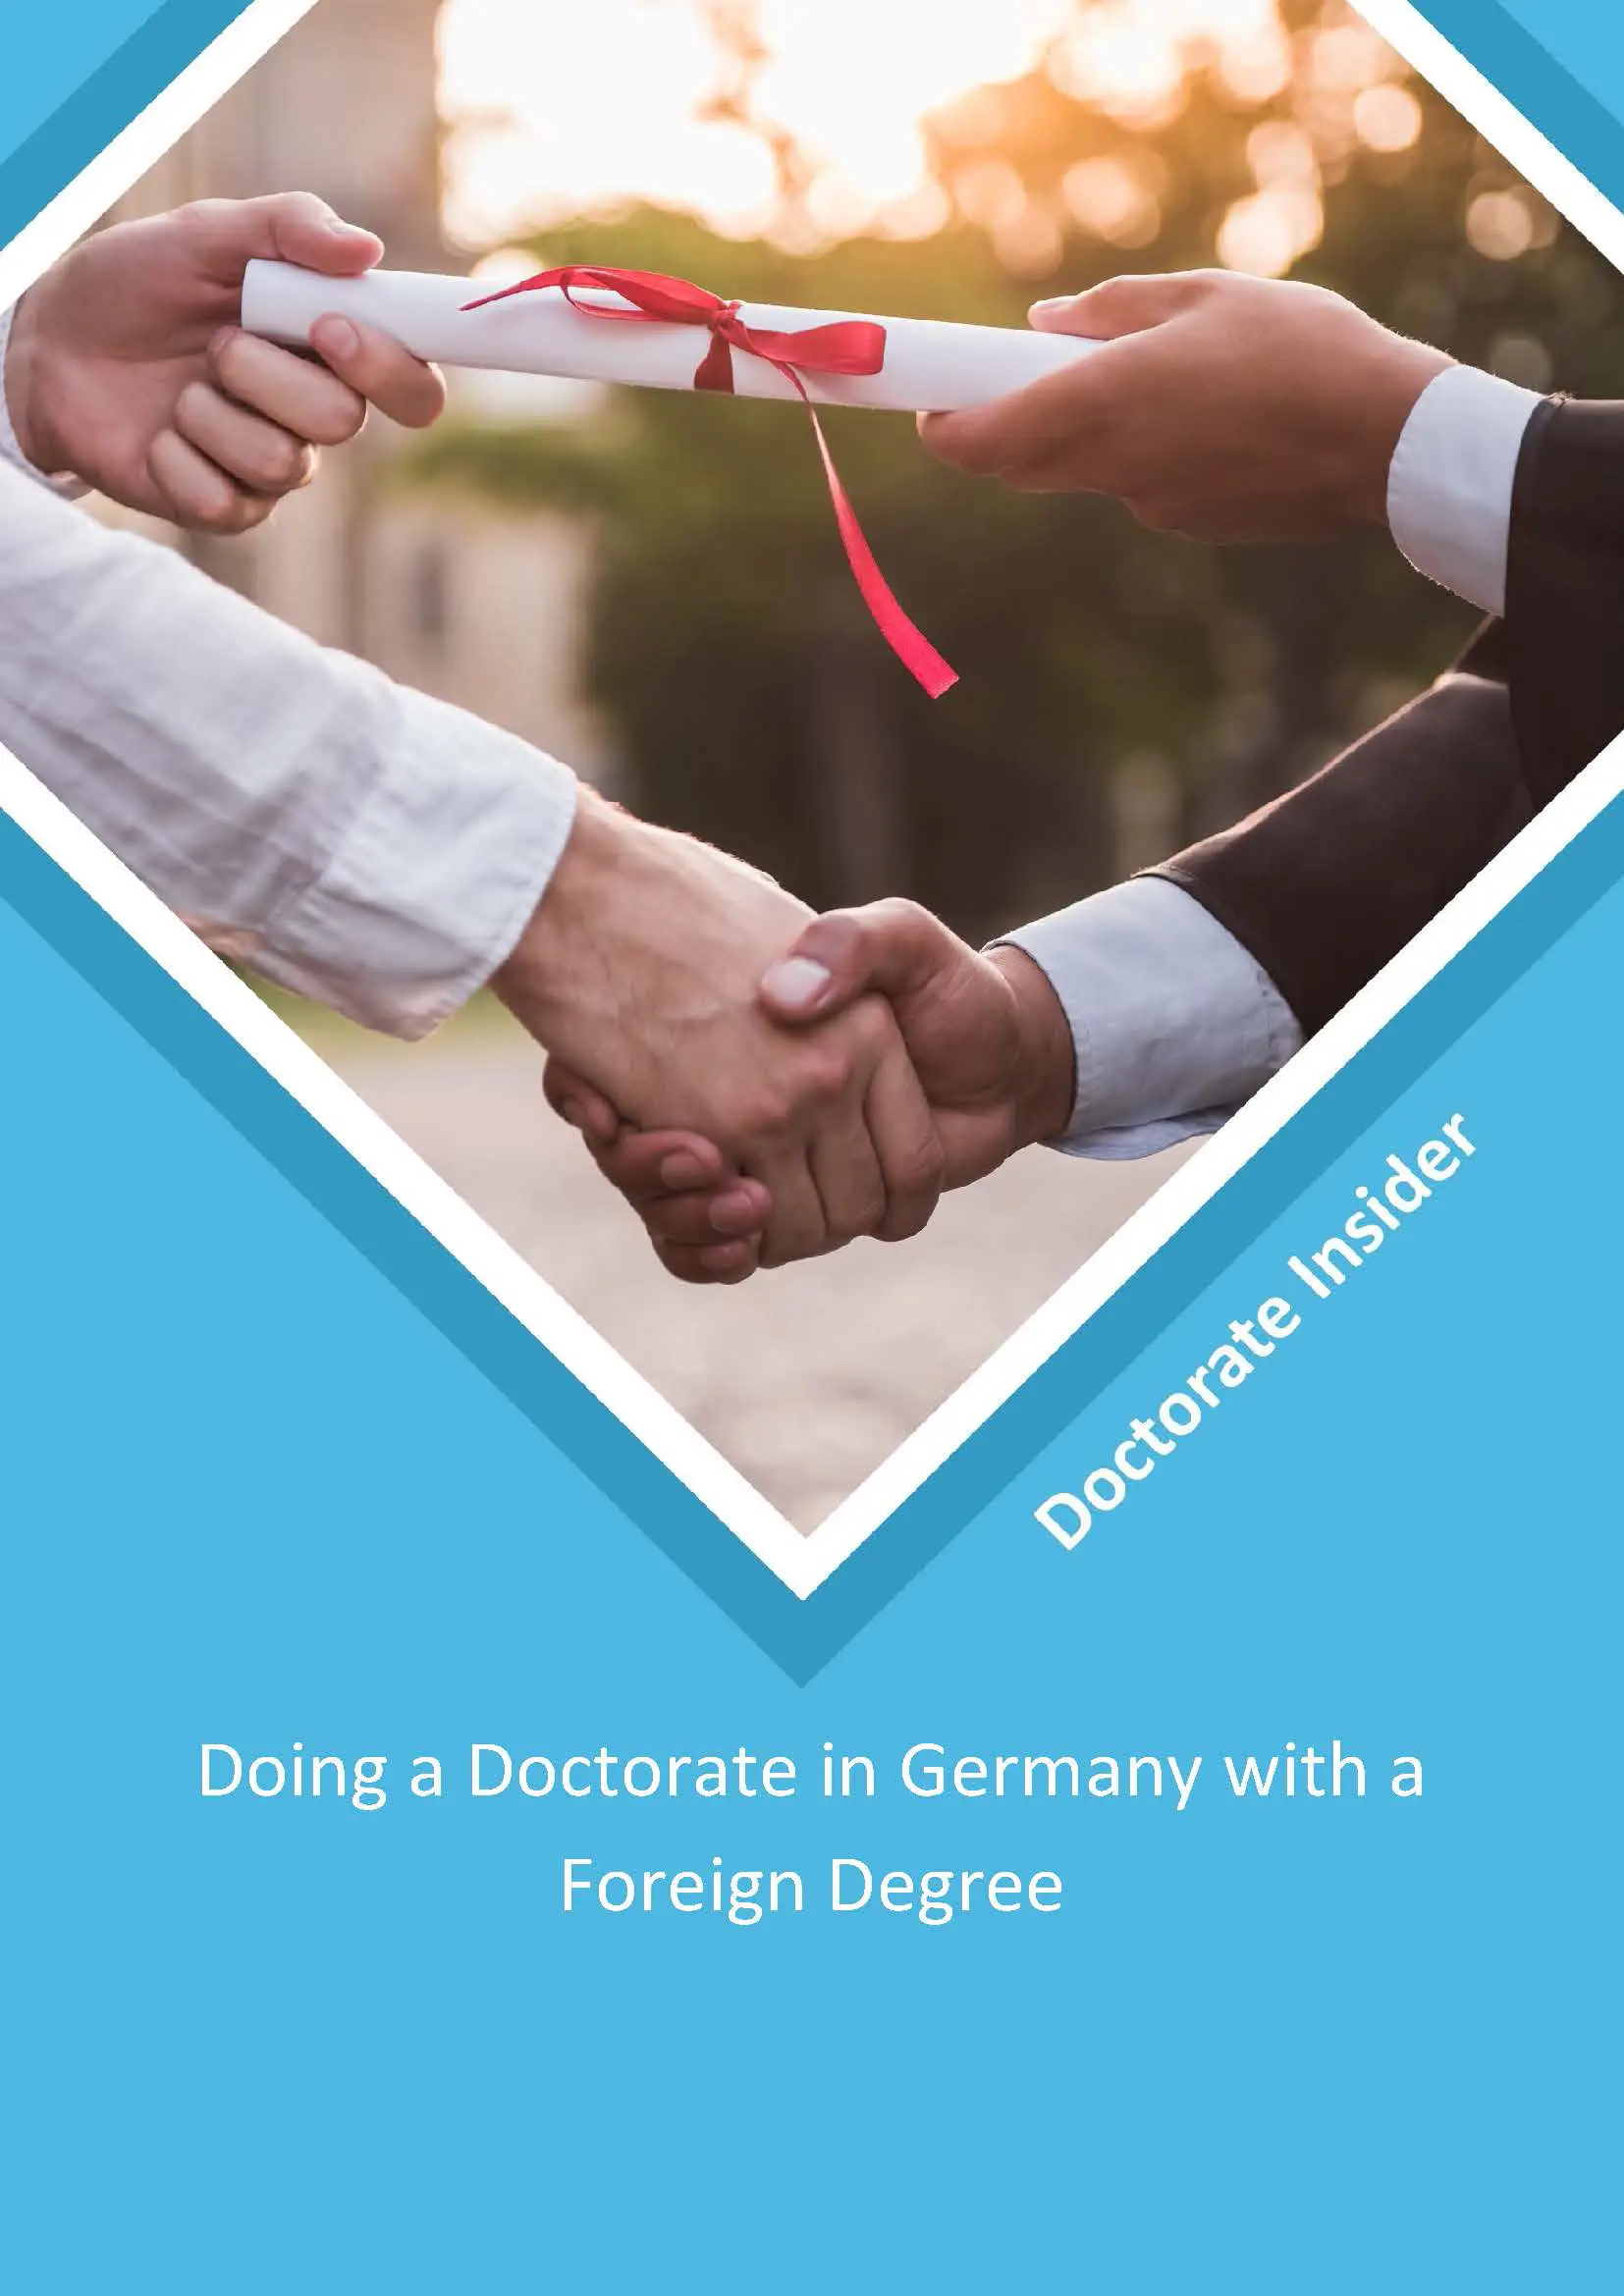 Doctorate Insider Guide Doing a Doctorate in Germany